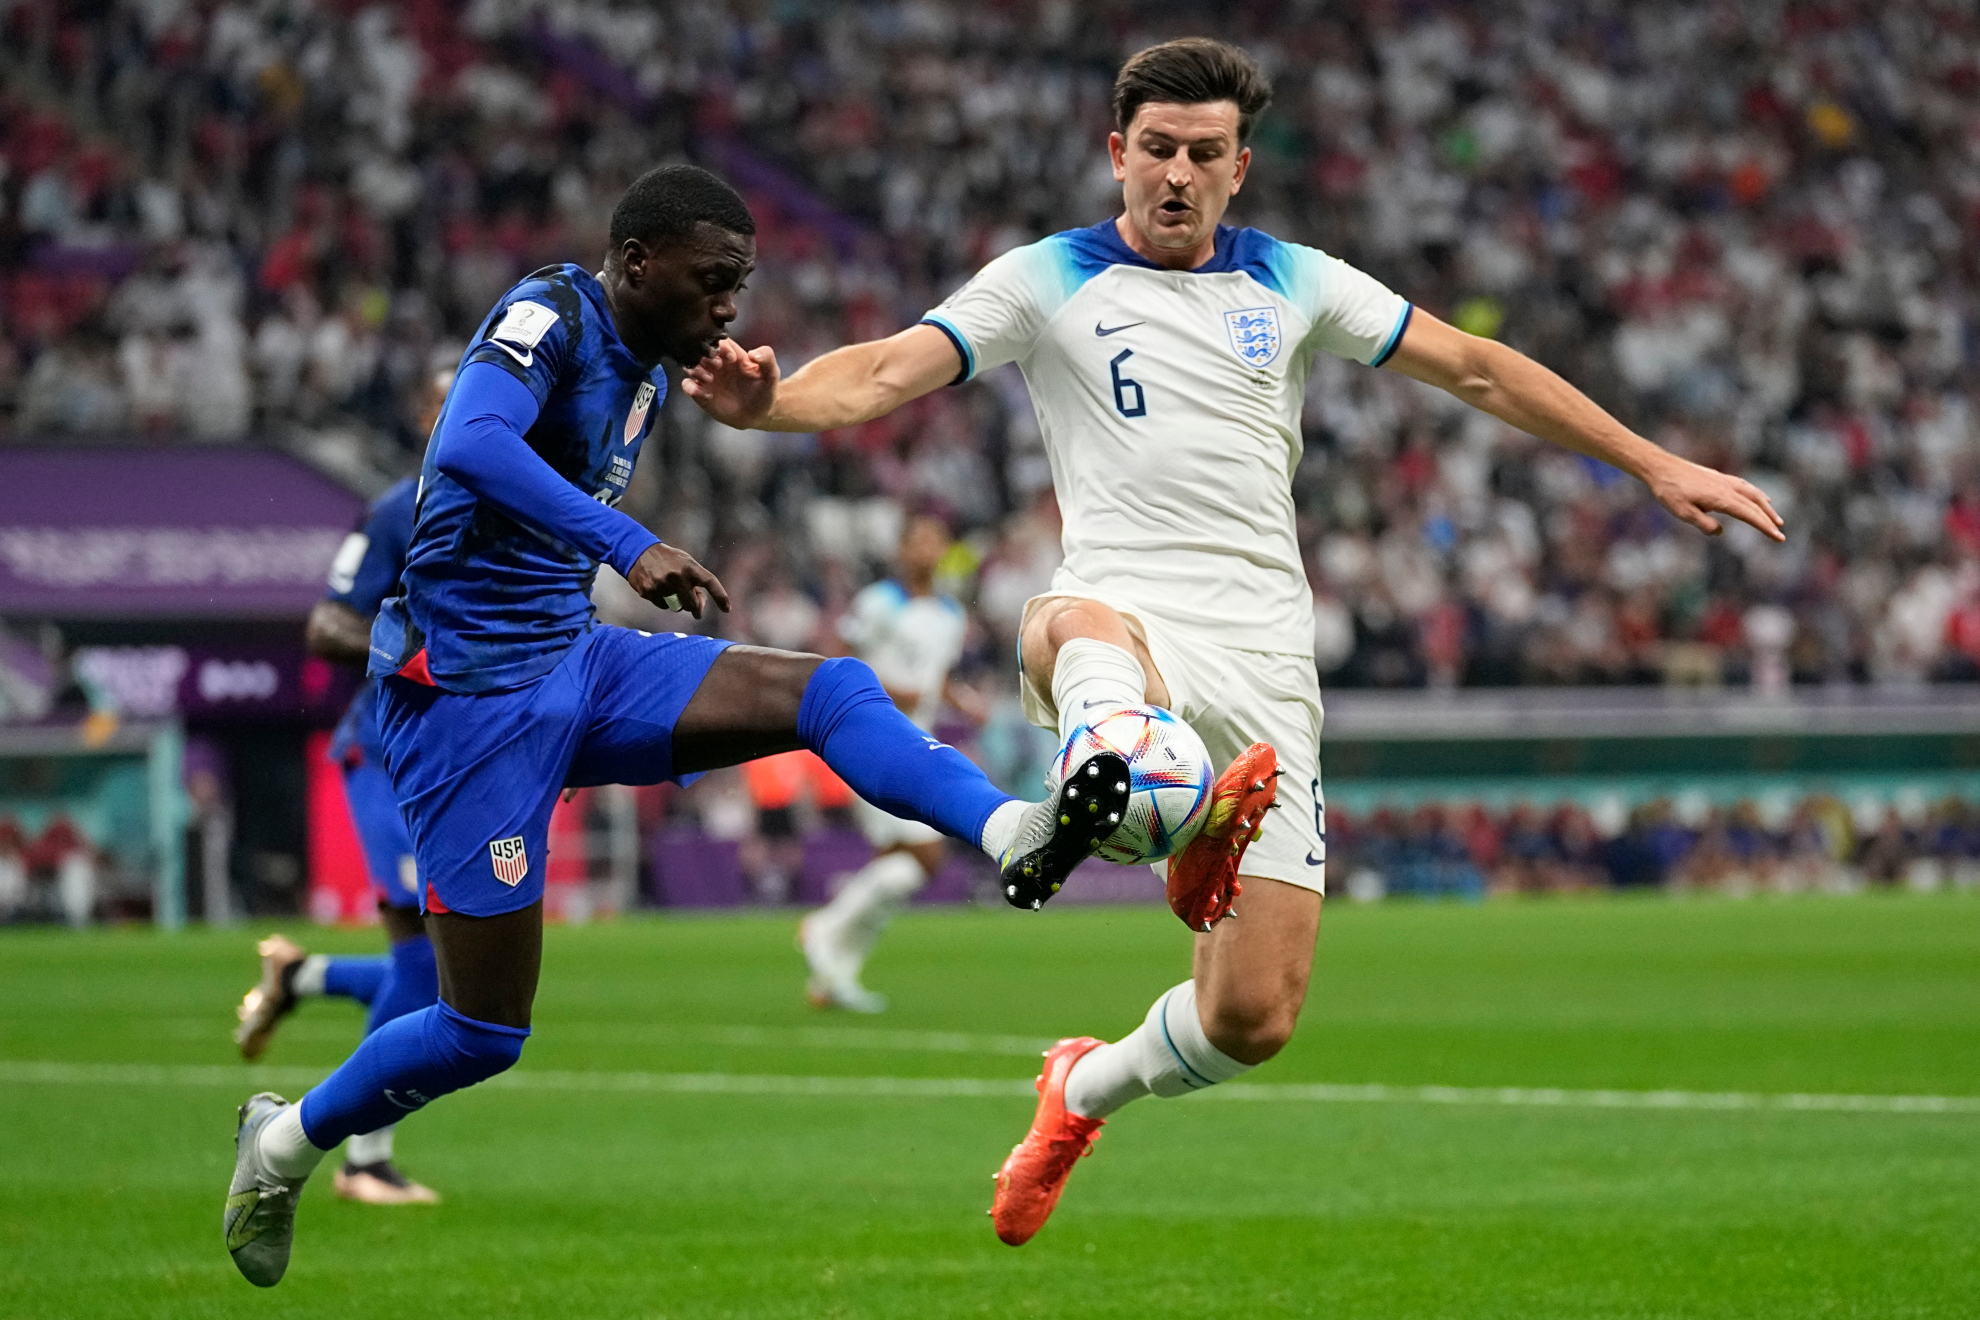 The United States and England battled it out in their group stage match at the World Cup.